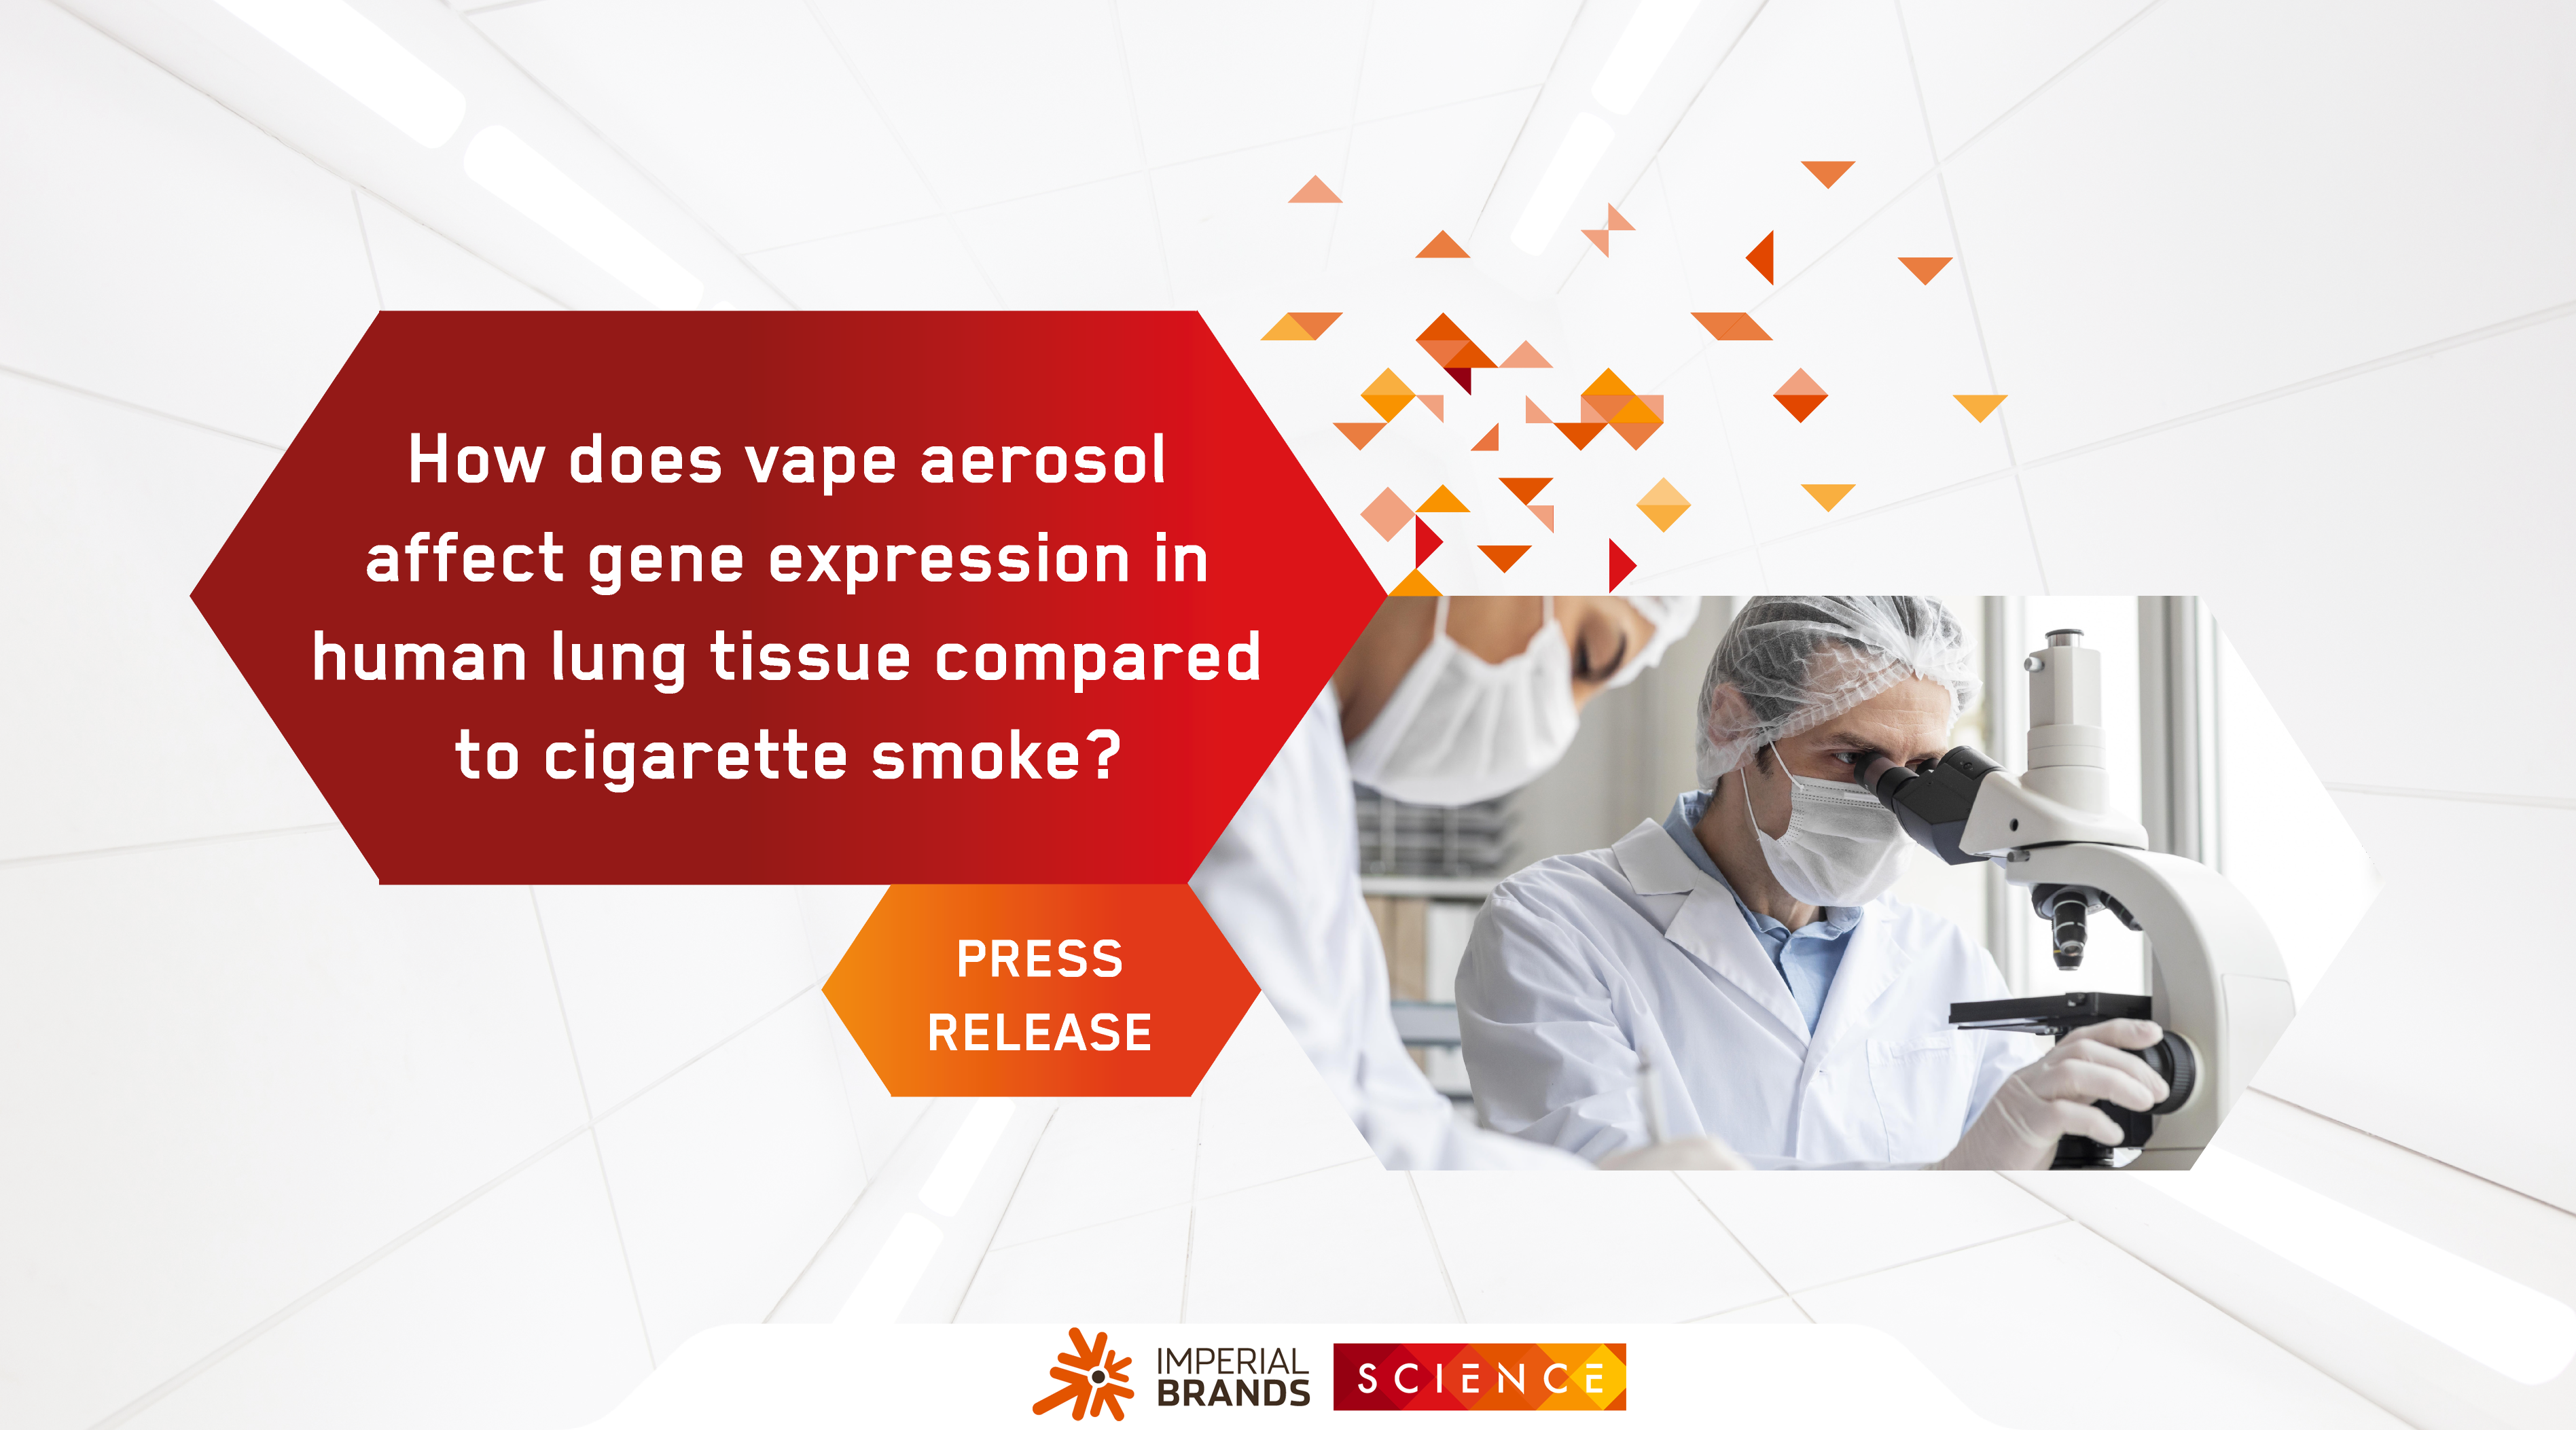 Press release: How does vape aerosol affect gene expression responses in human lung tissue compared to cigarette smoke?